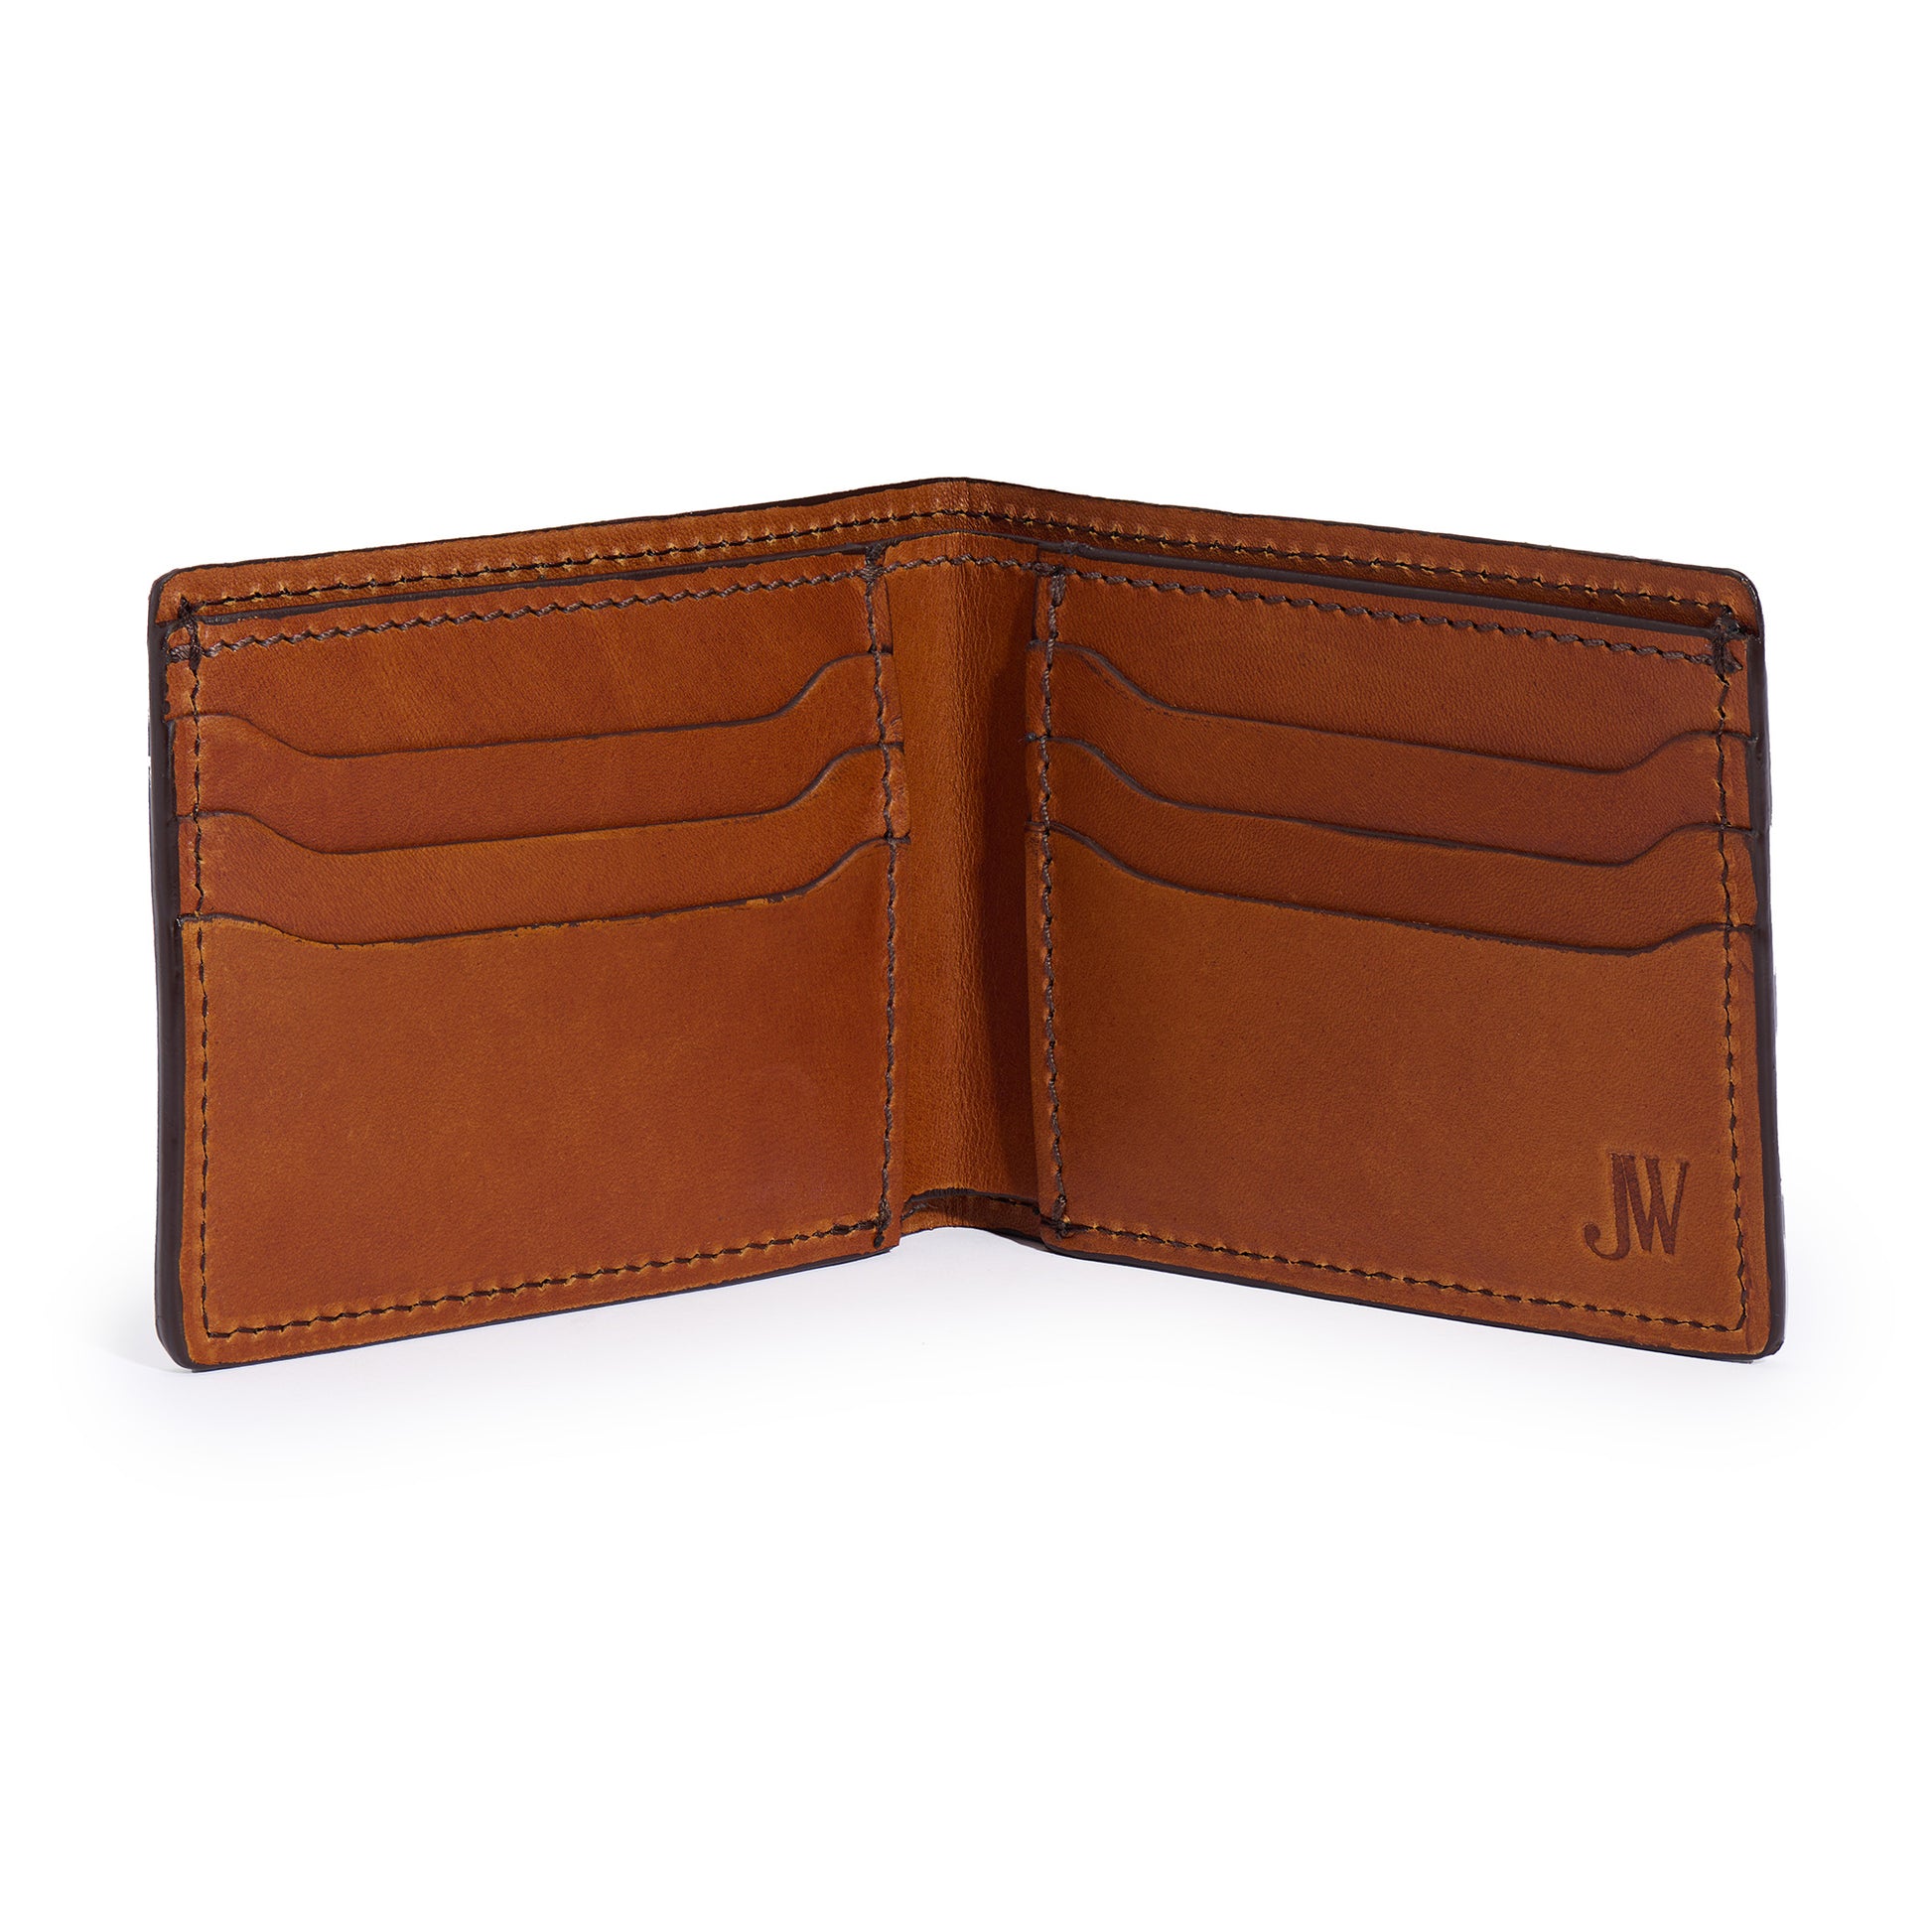 inside of full grain leather bifold wallet by Jackson Wayne in saddle tan color